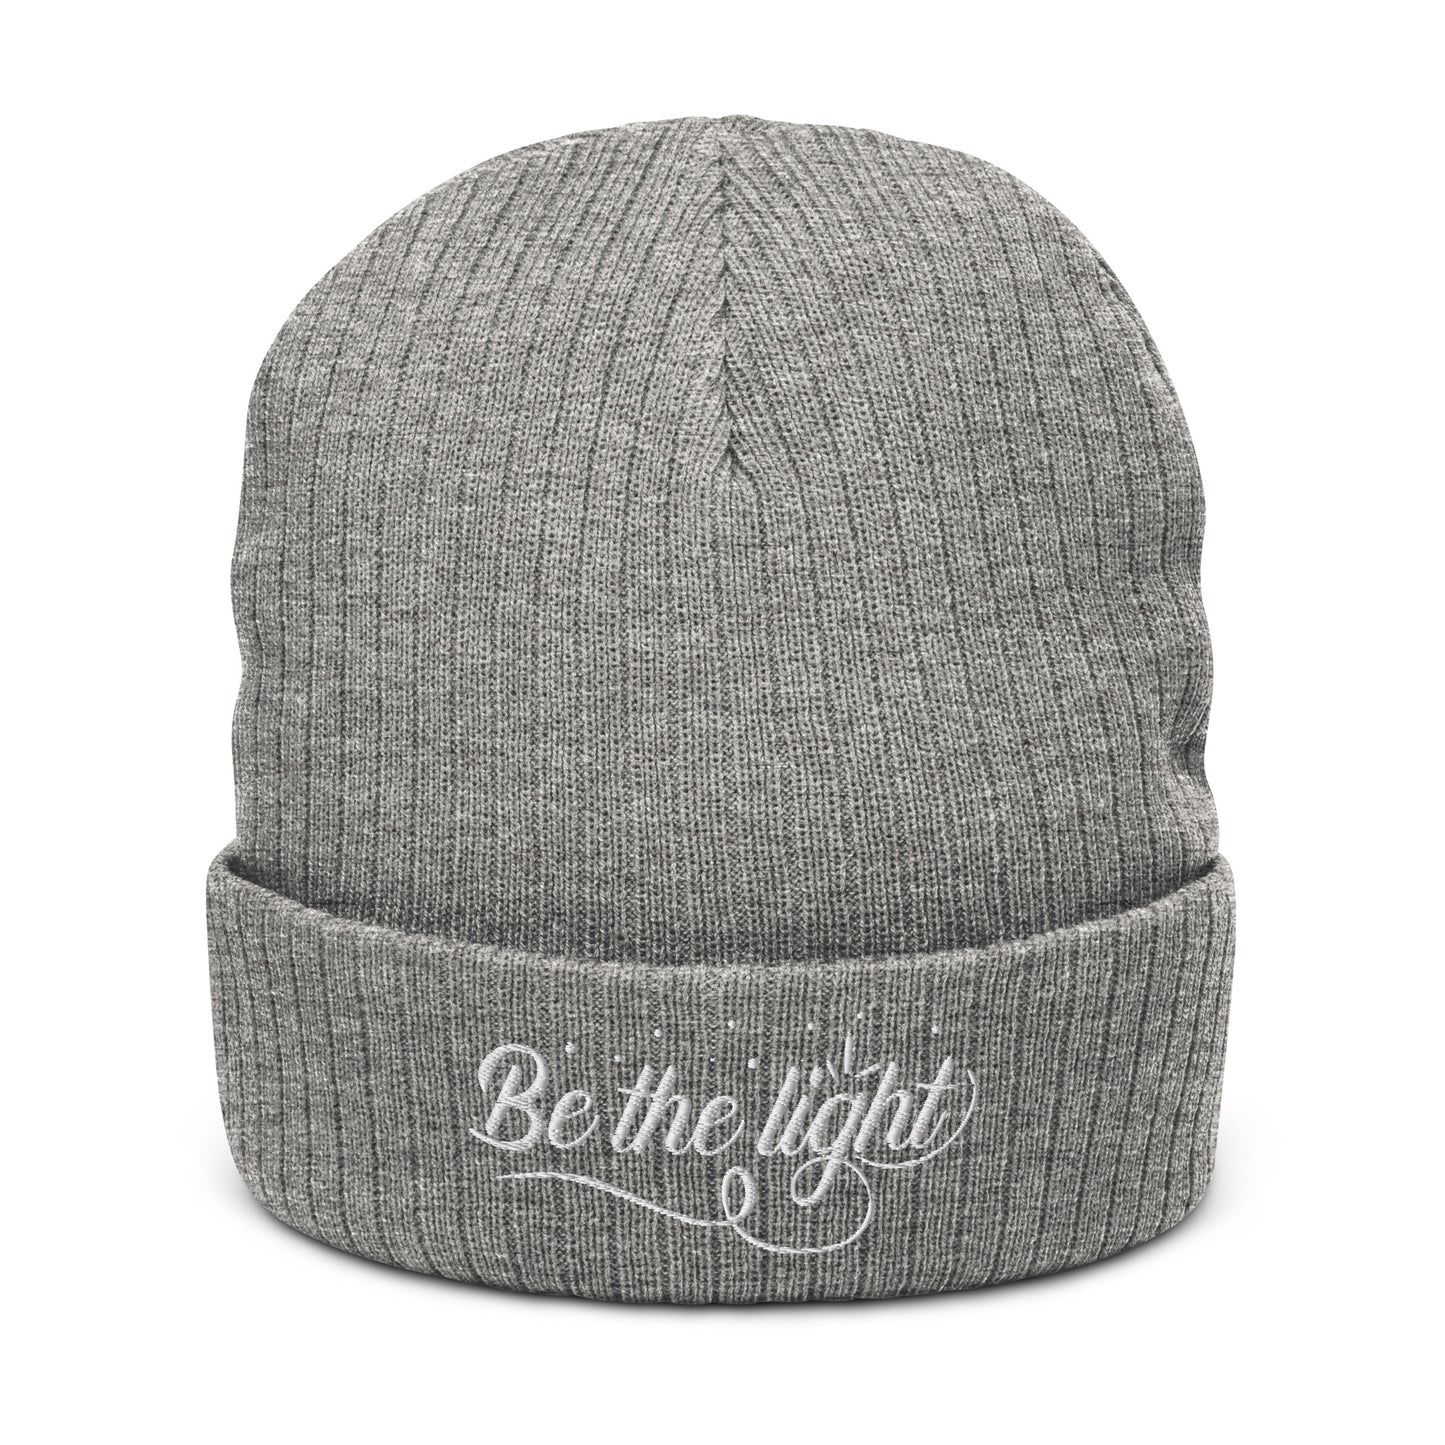 "Be The Light" Ribbed Knit Beanie